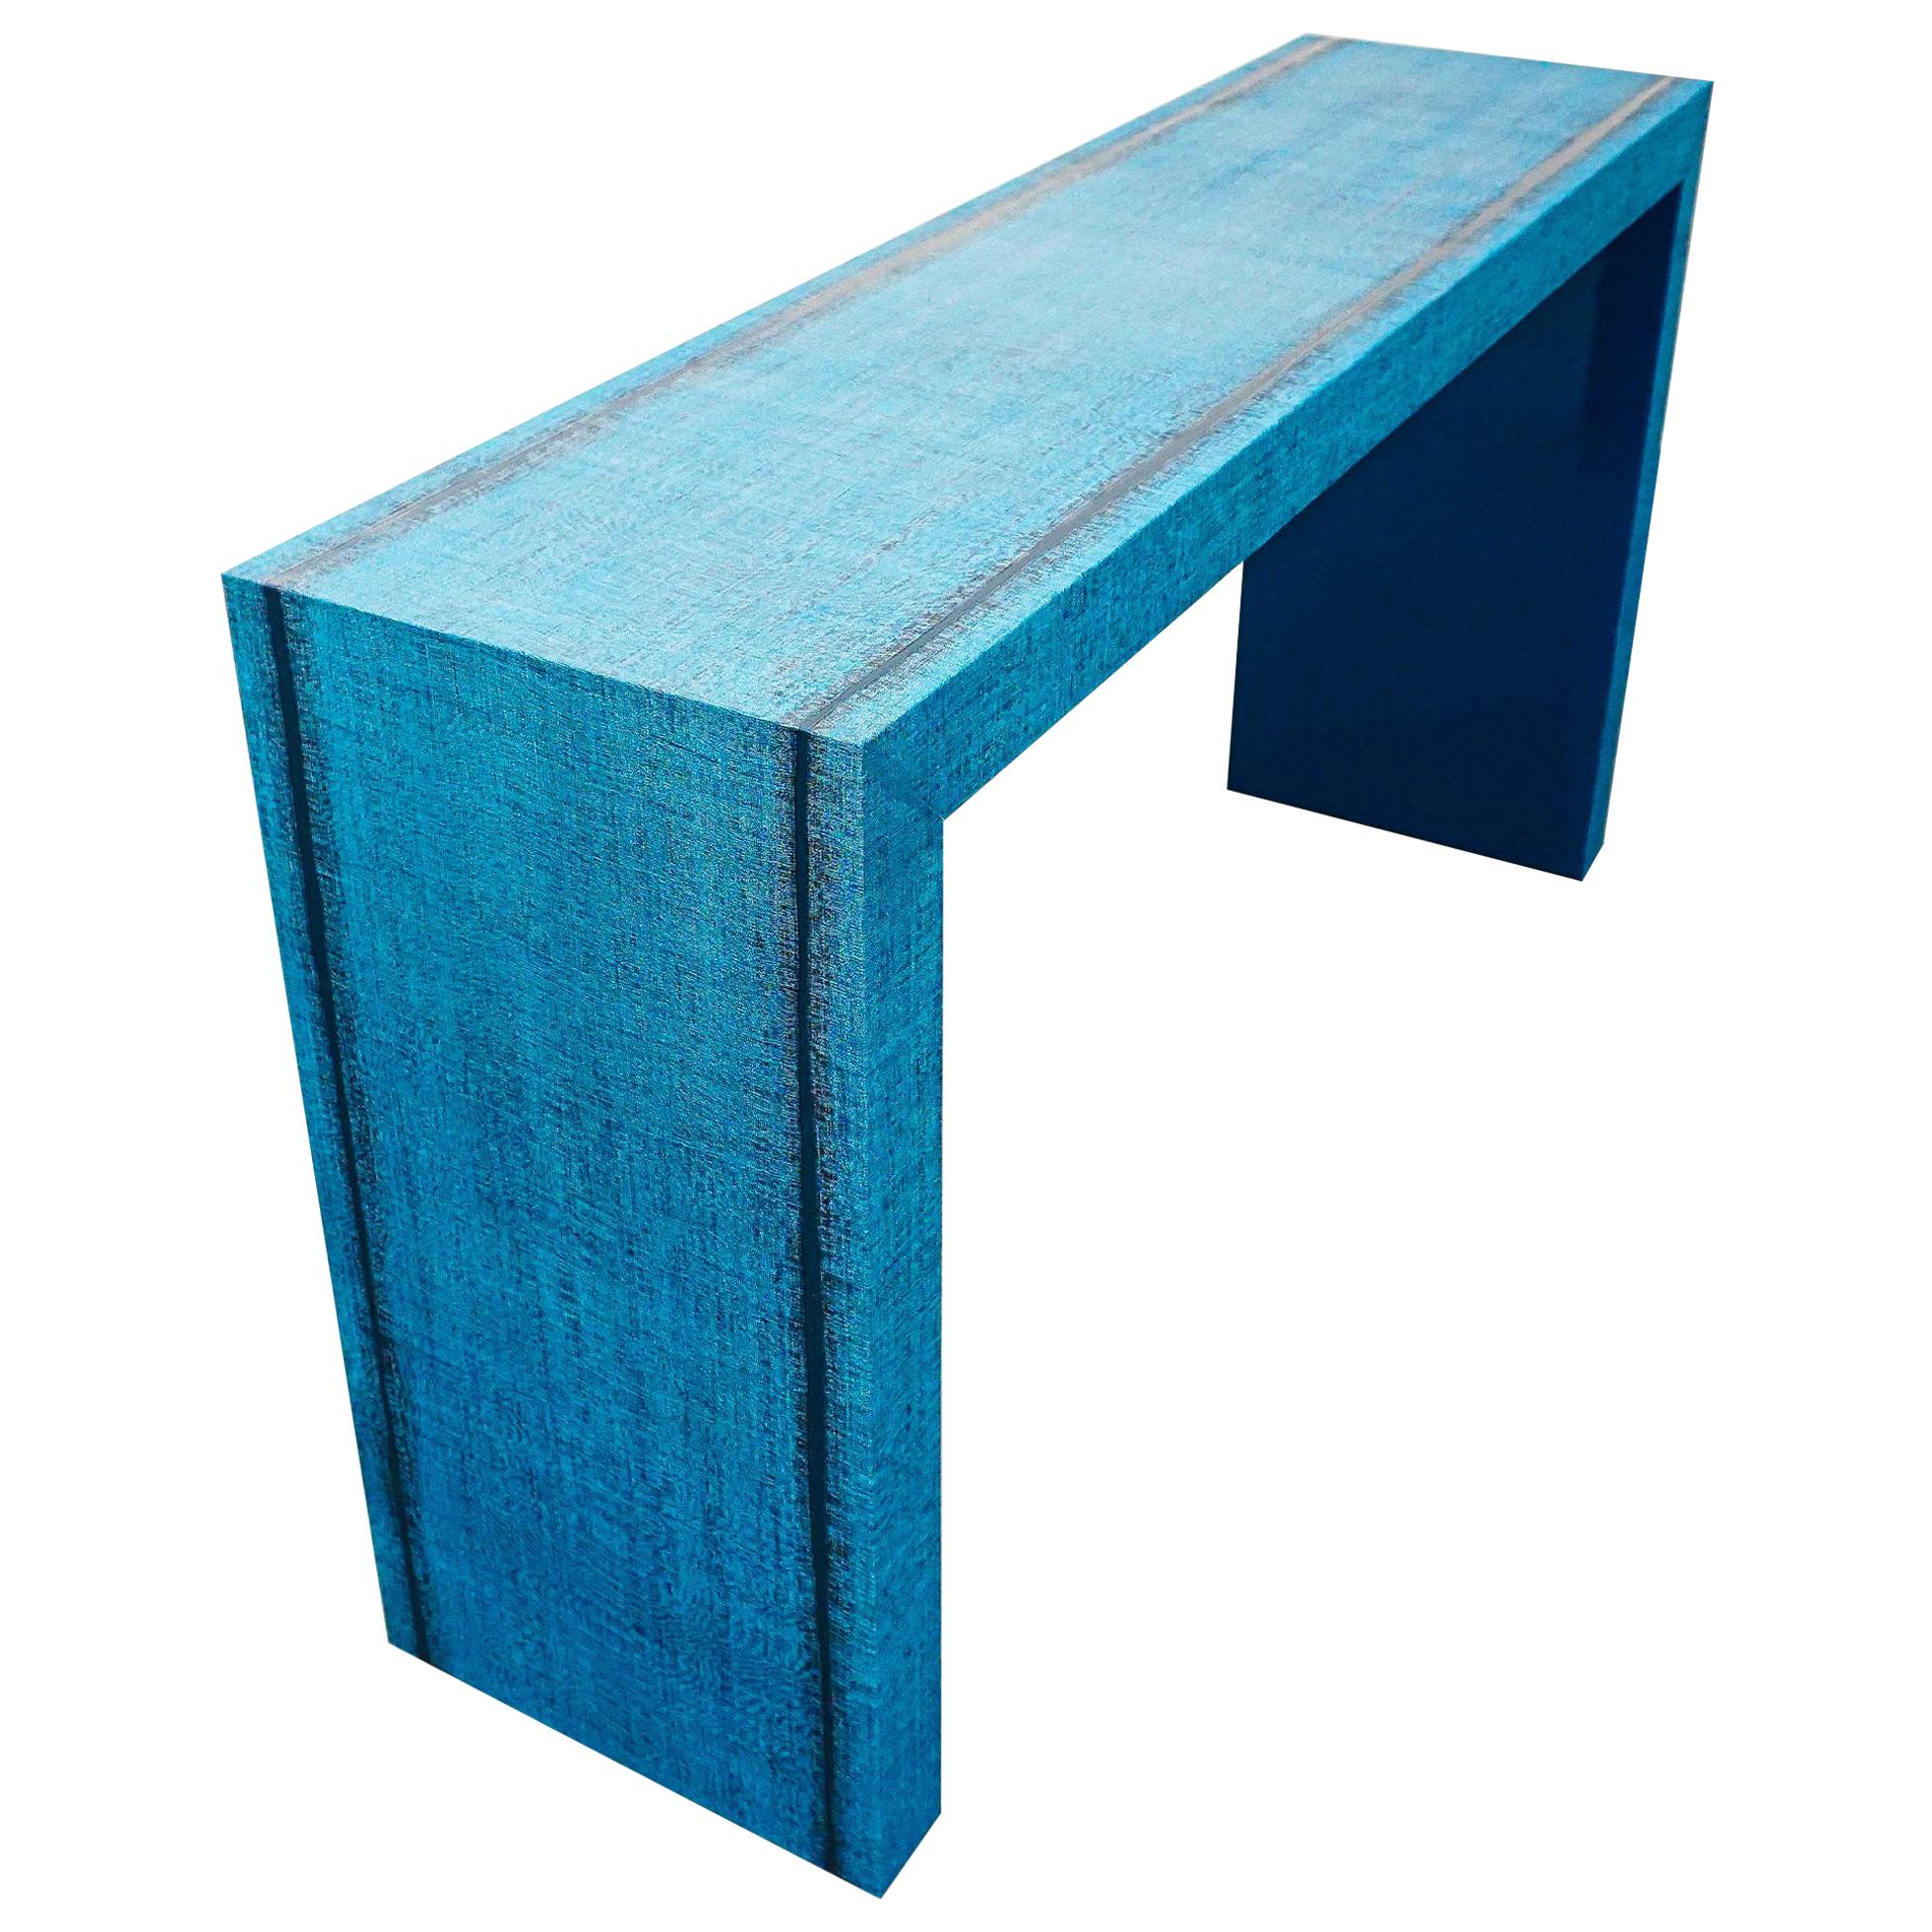 Vinyl Waterfall Console with Deep Blue Lacquered Underside